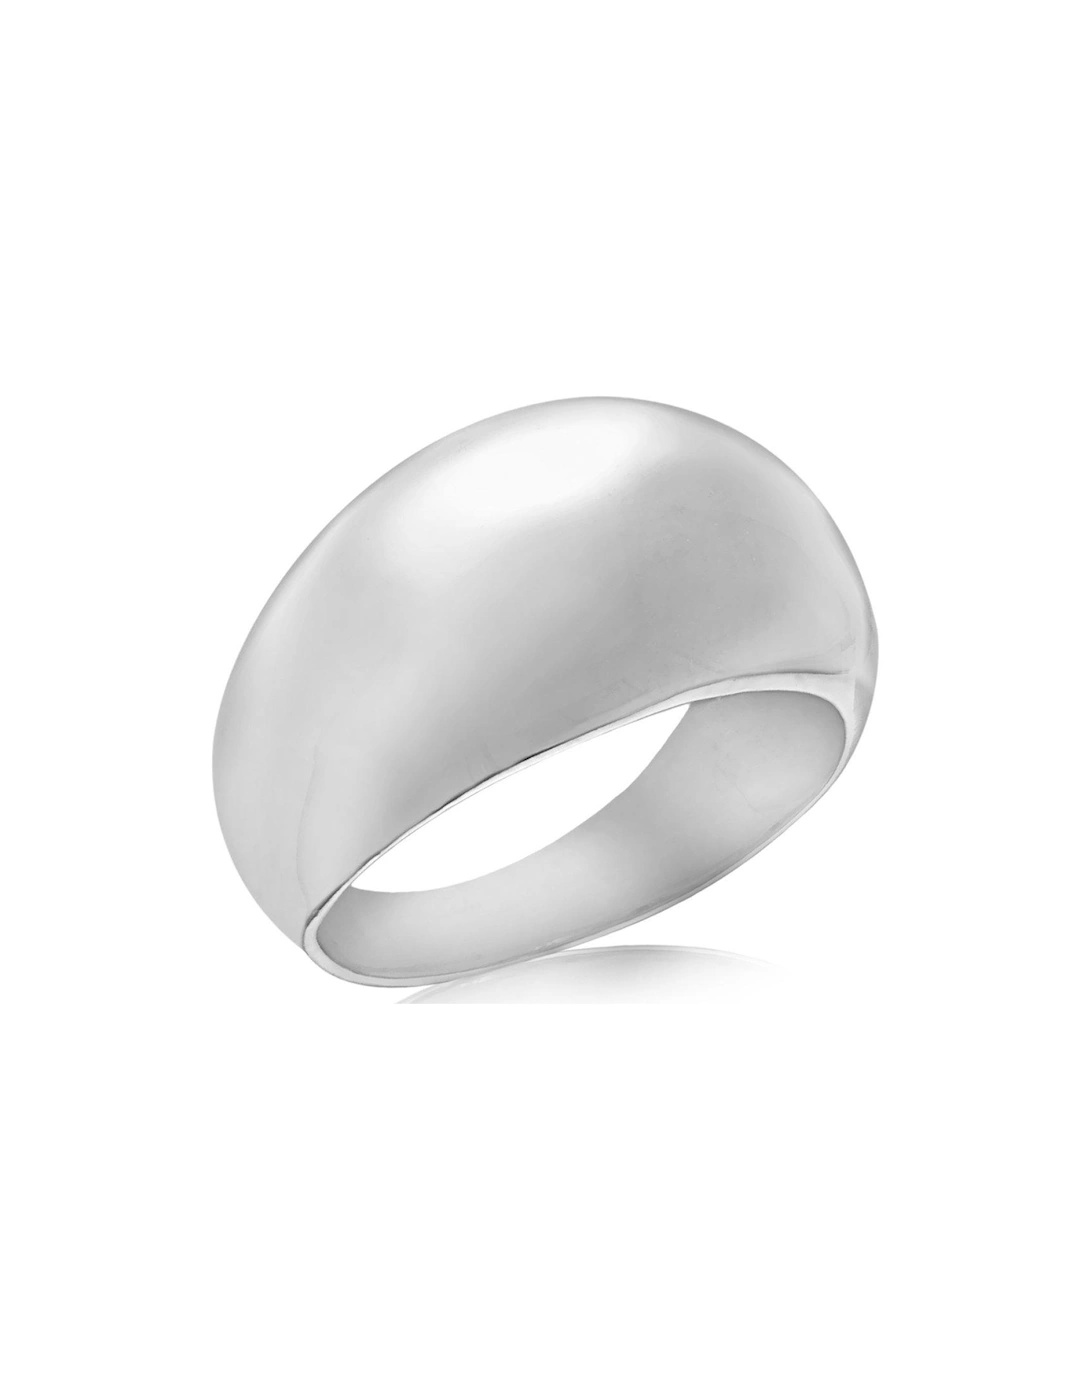 Sterling Silver 12.5mm x 4.5mm Dome Ring, 2 of 1